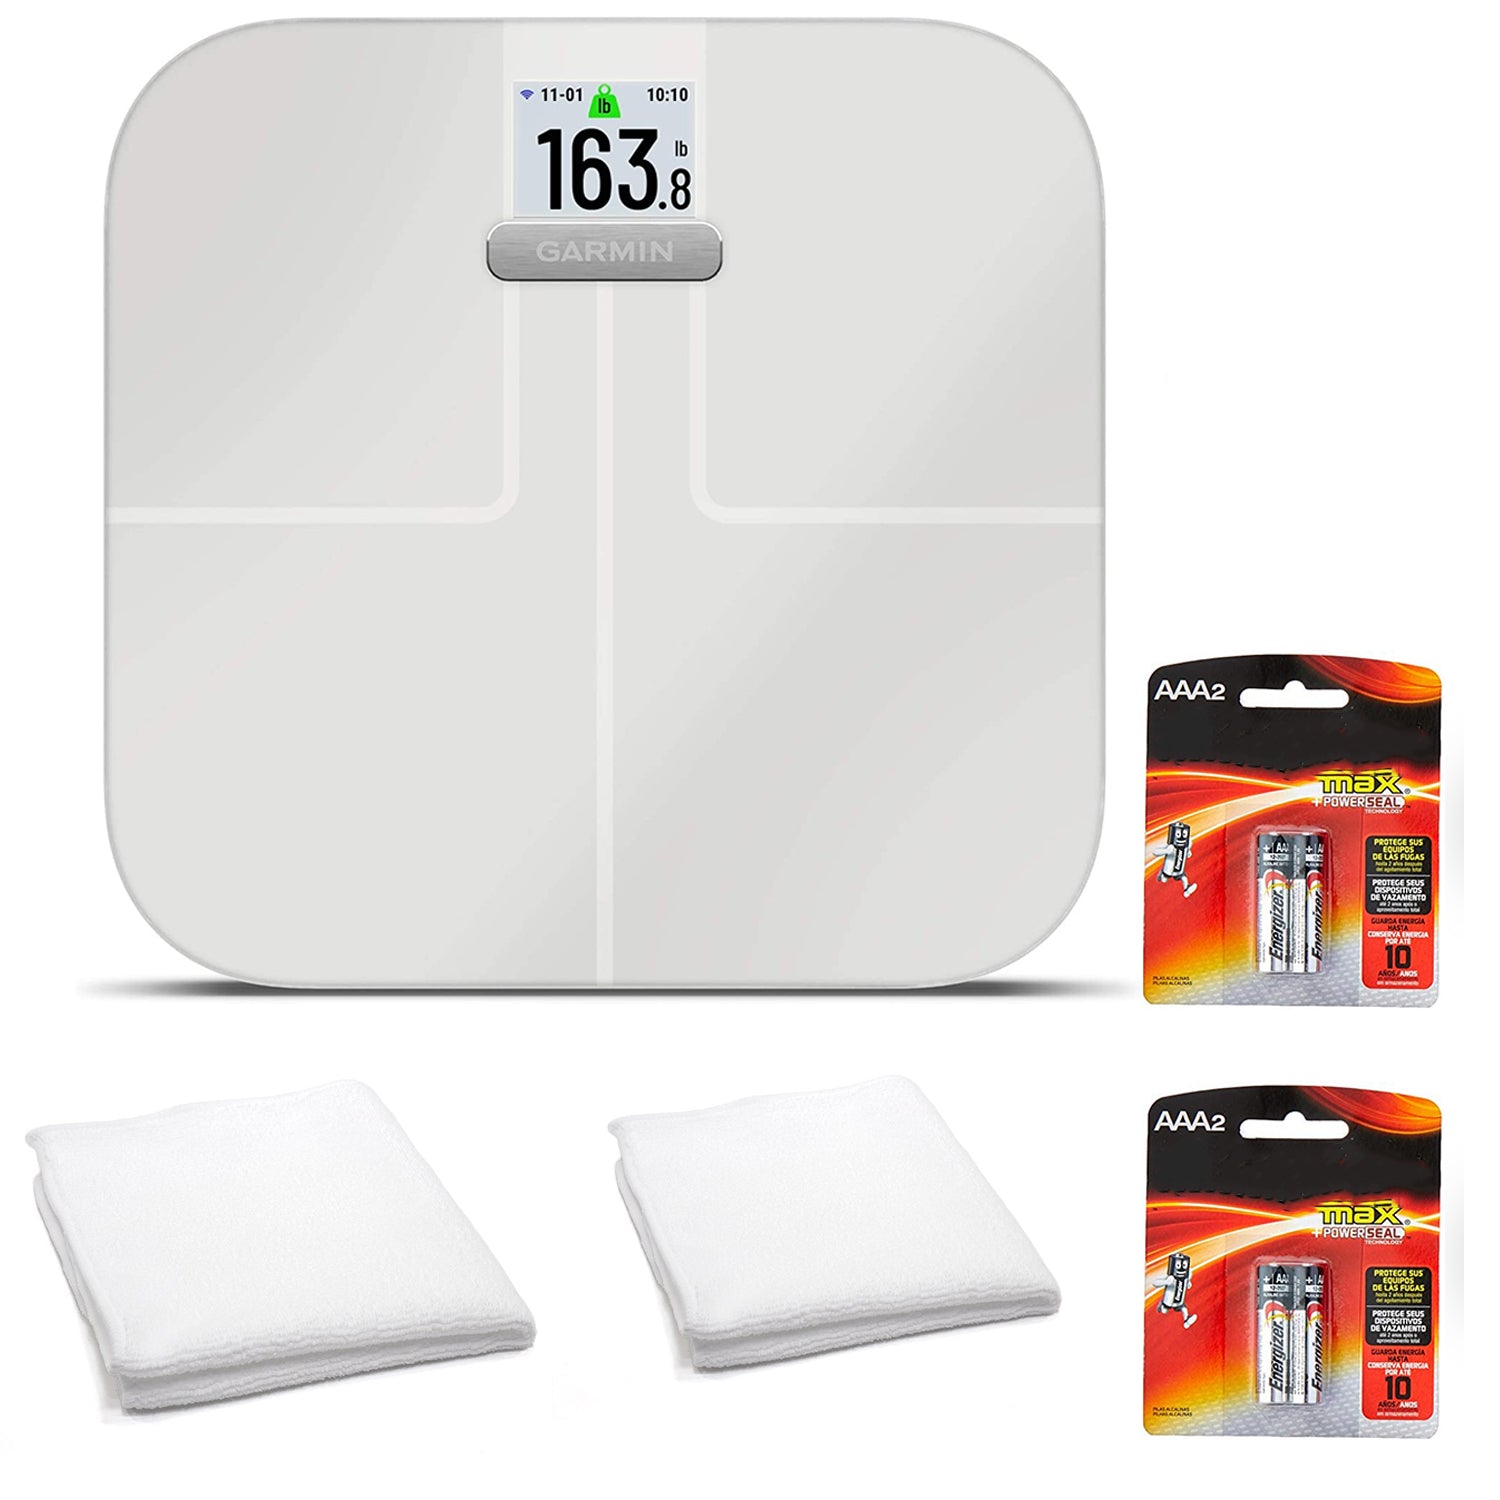 Garmin Index S2 Smart Scale with Wireless Connectivity-White With Accessories Bundle